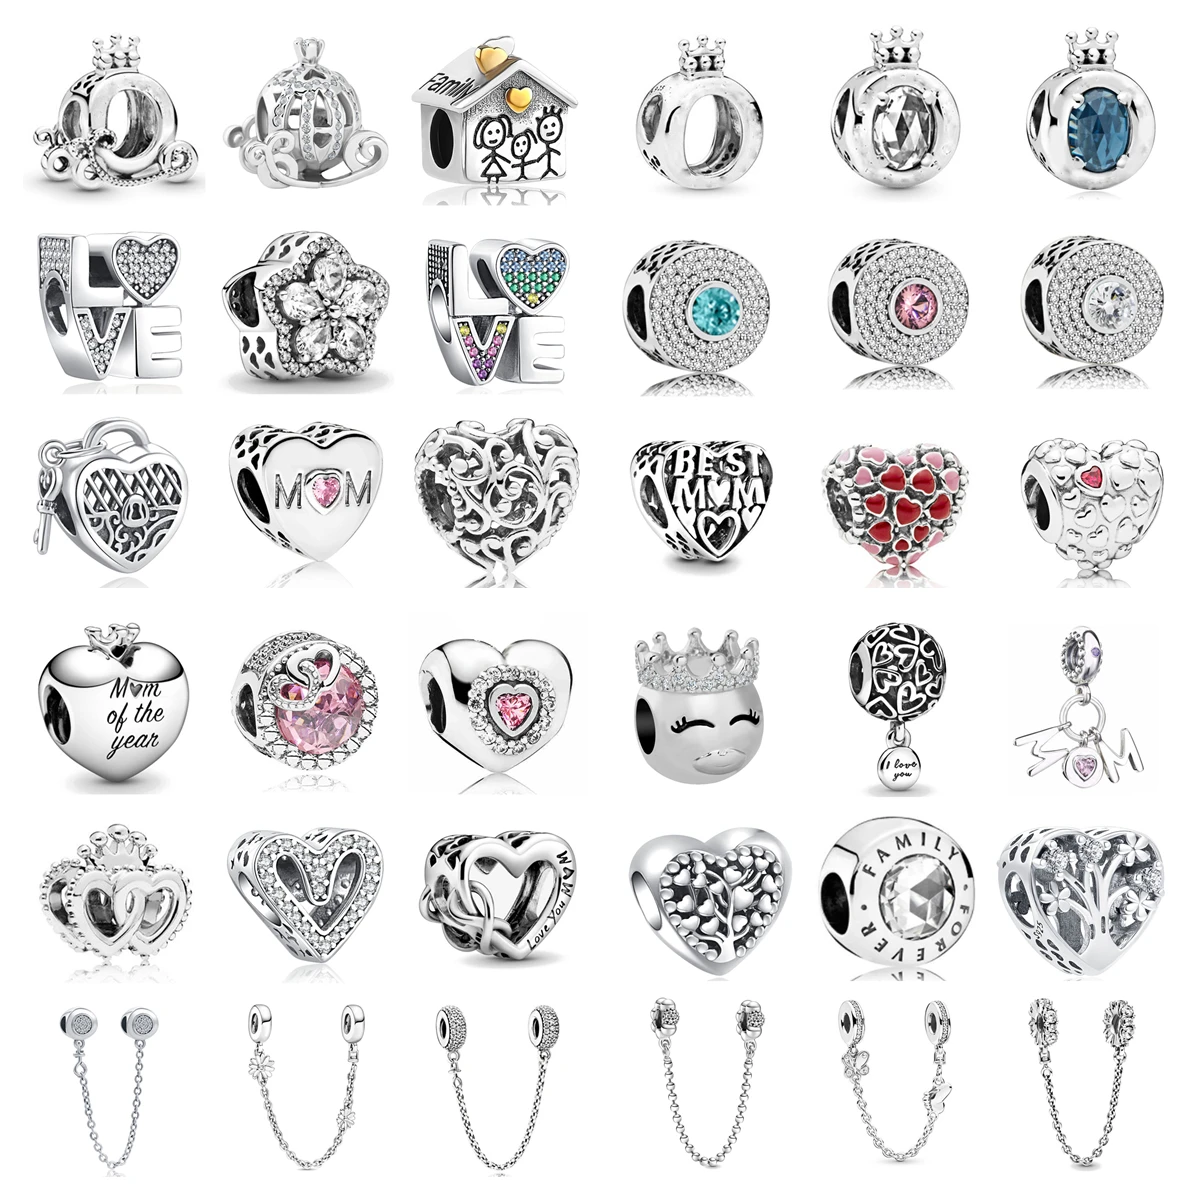 The Meaning Behind Pandoras Charms Uncovering The Story Of Your Life   Sweetandspark